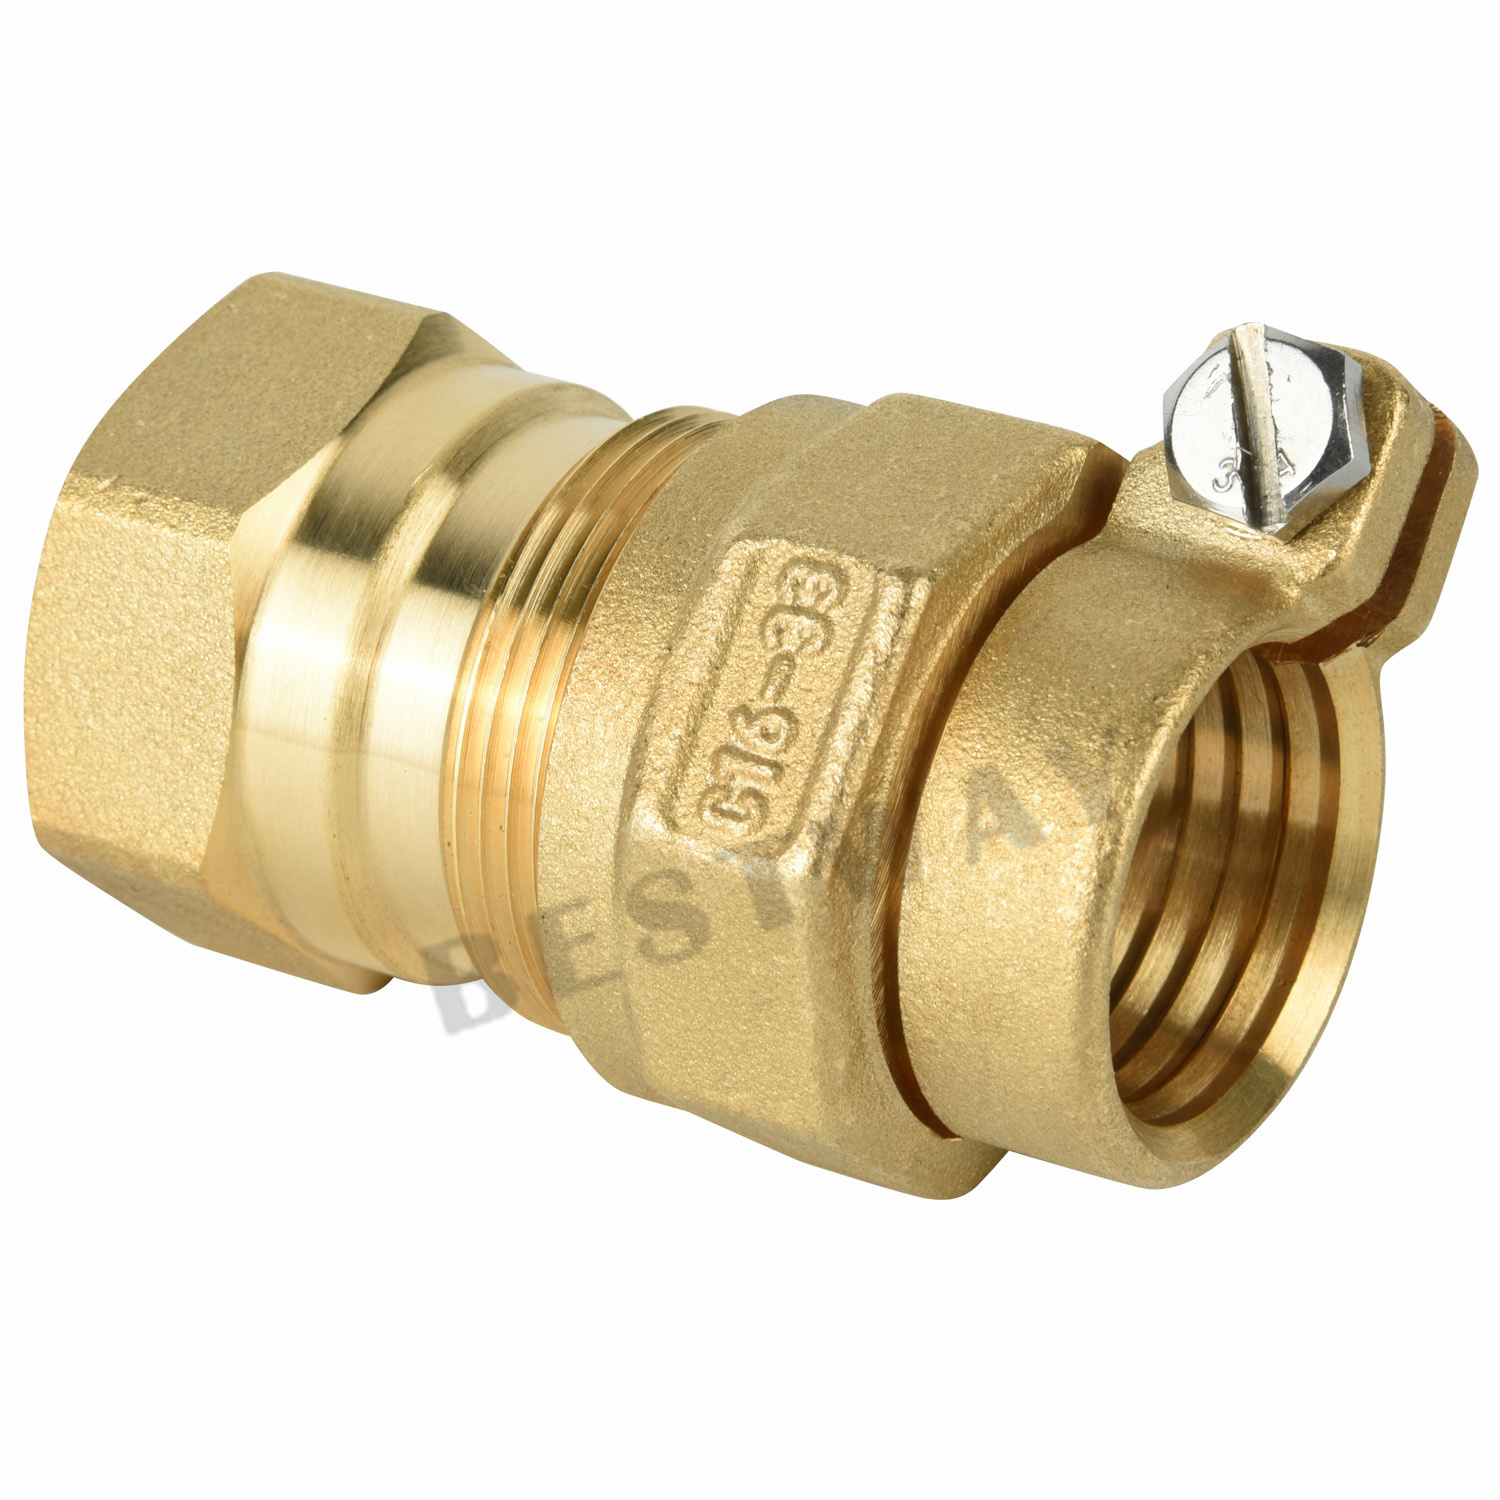 Brass Adapter connector coupling FXM